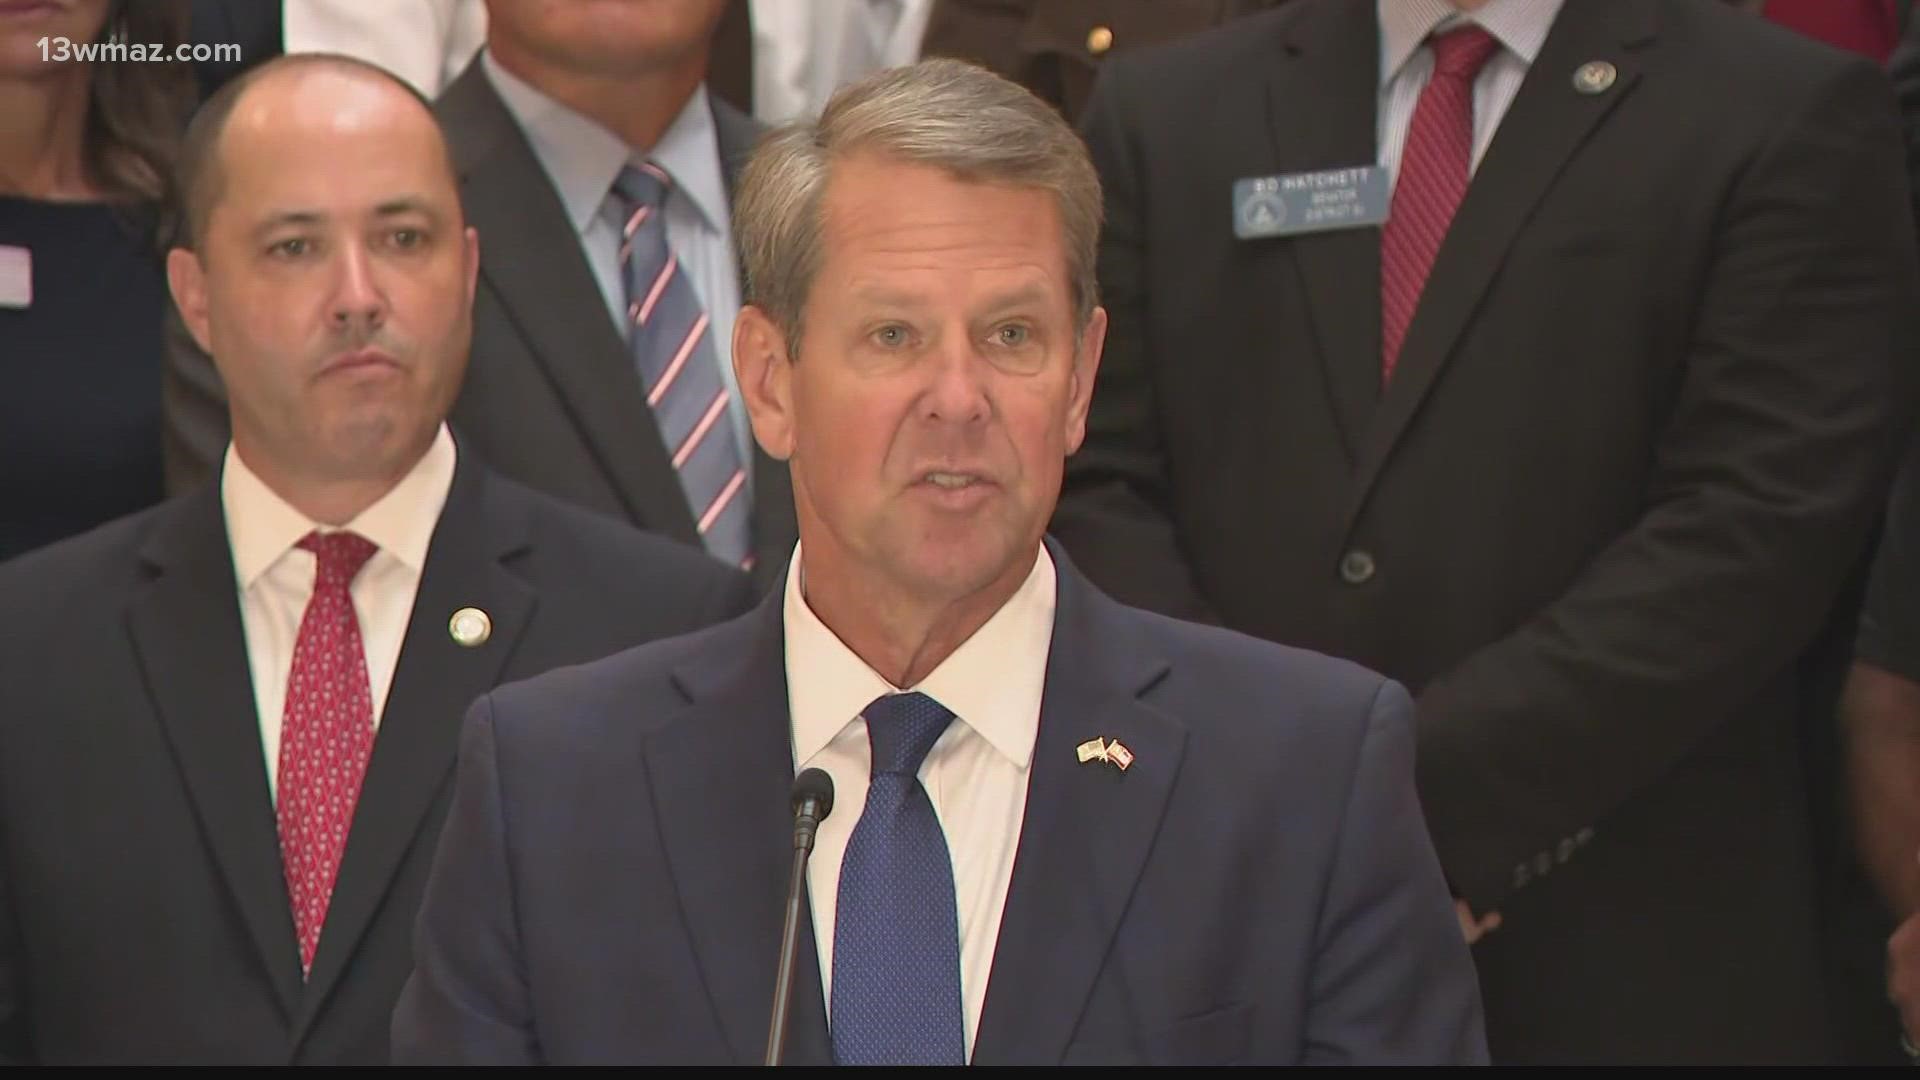 Georgia Governor Brian Kemp announced a $1,000 pay supplement for all eligible law enforcement officials and first responders across the state of Georgia on Monday.